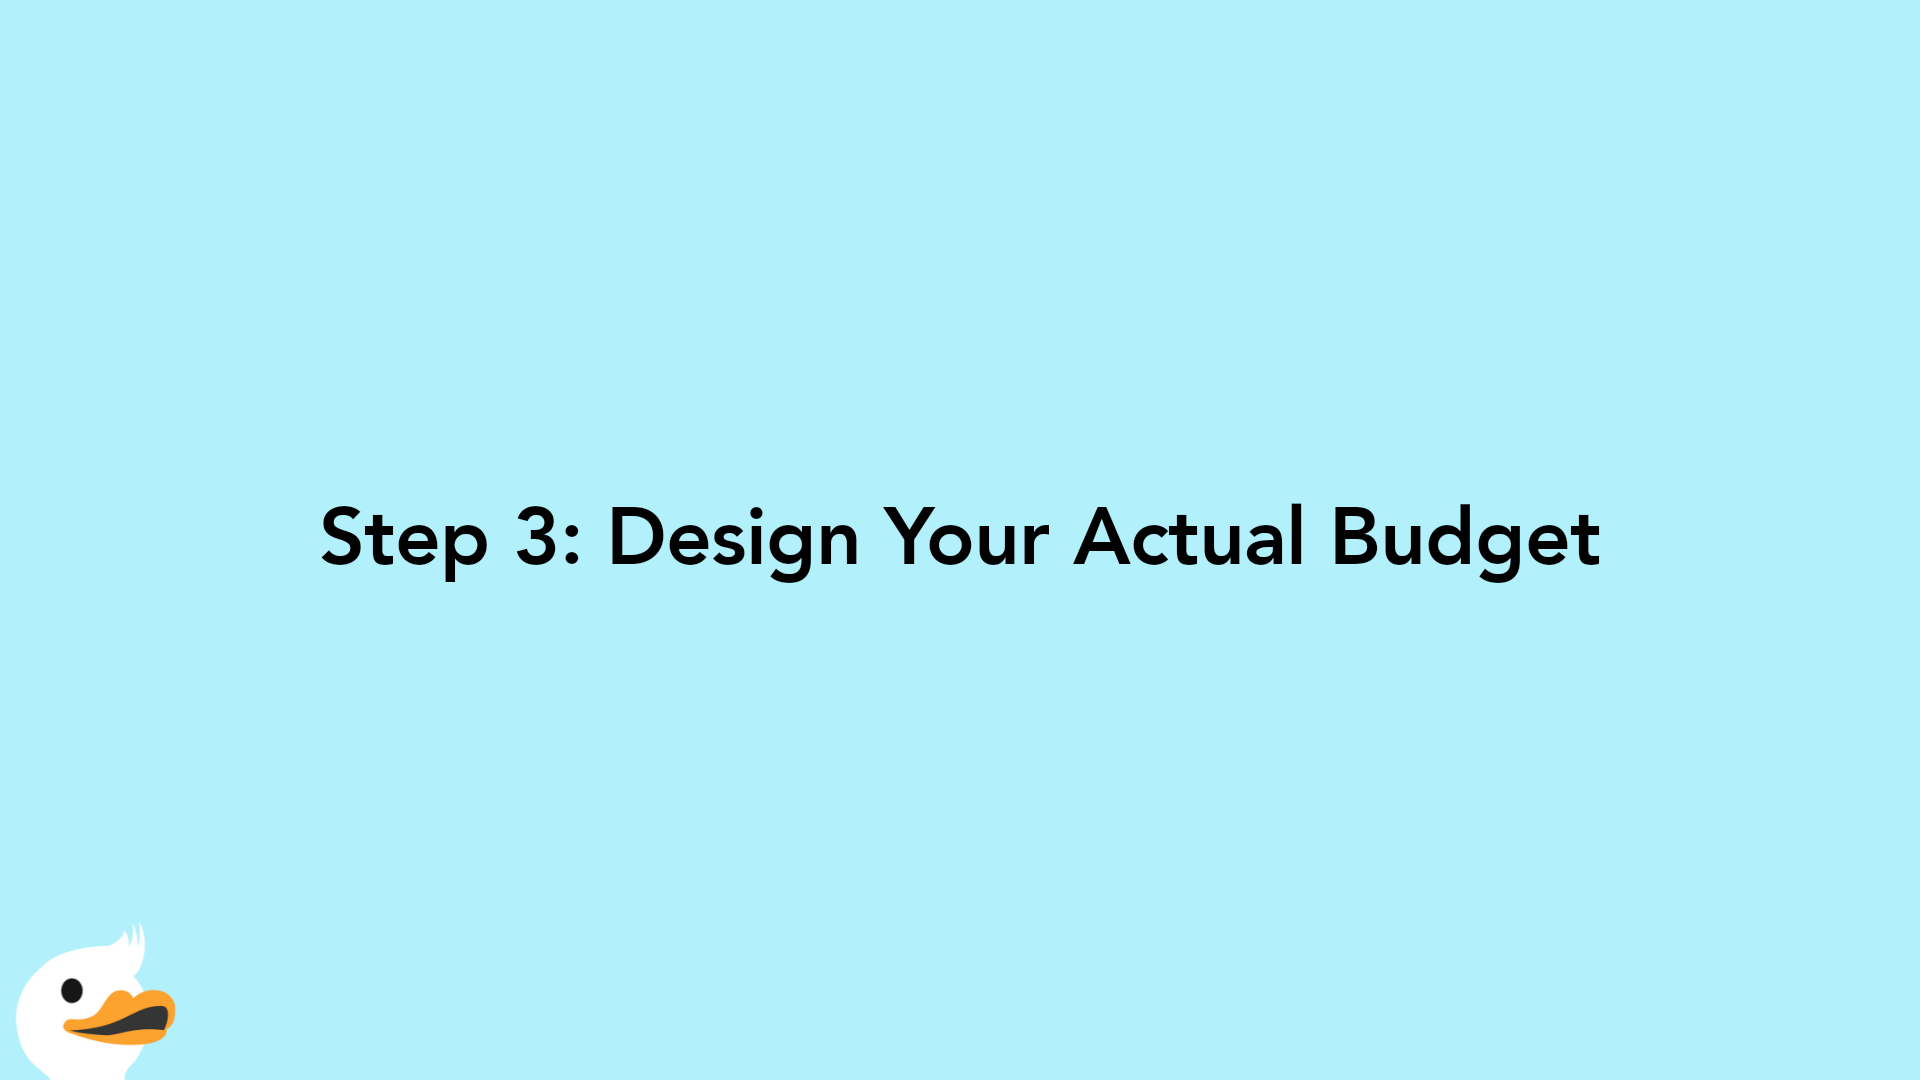 Step 3: Design Your Actual Budget